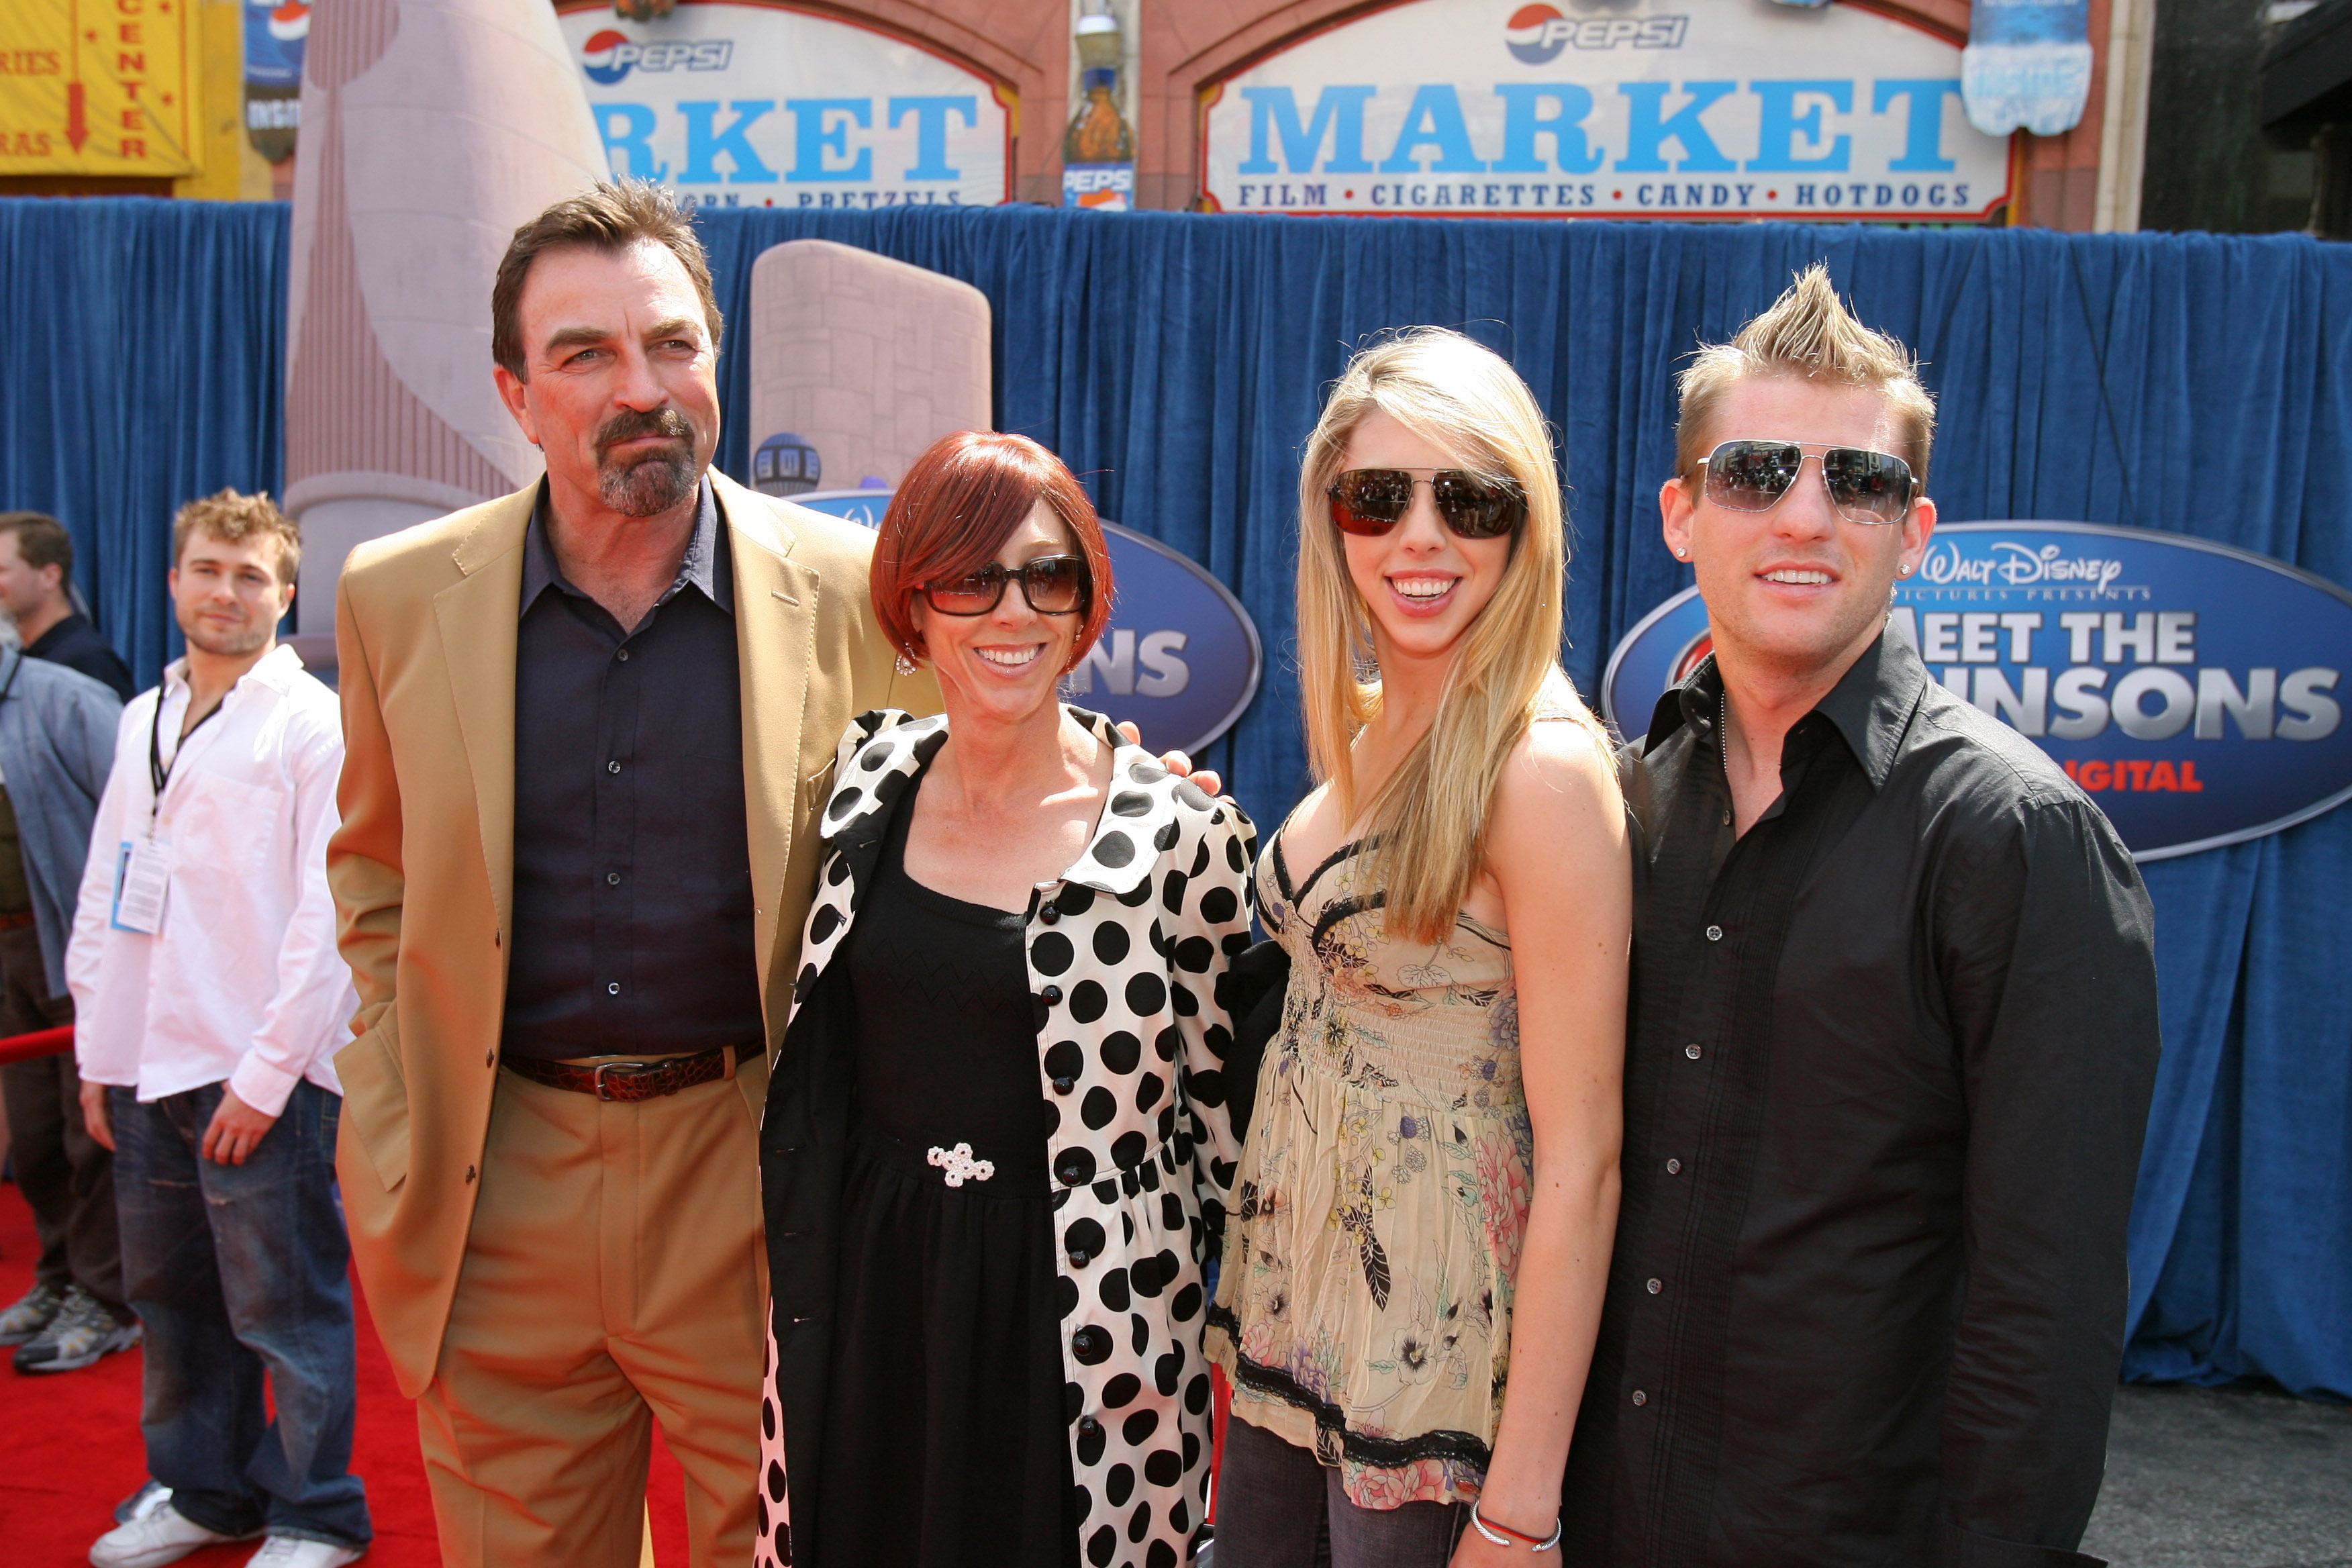 Tom Selleck, Jillie Mack, Hannah Selleck and guest in Hollywood, California on March 25, 2007 | Source: Getty Images